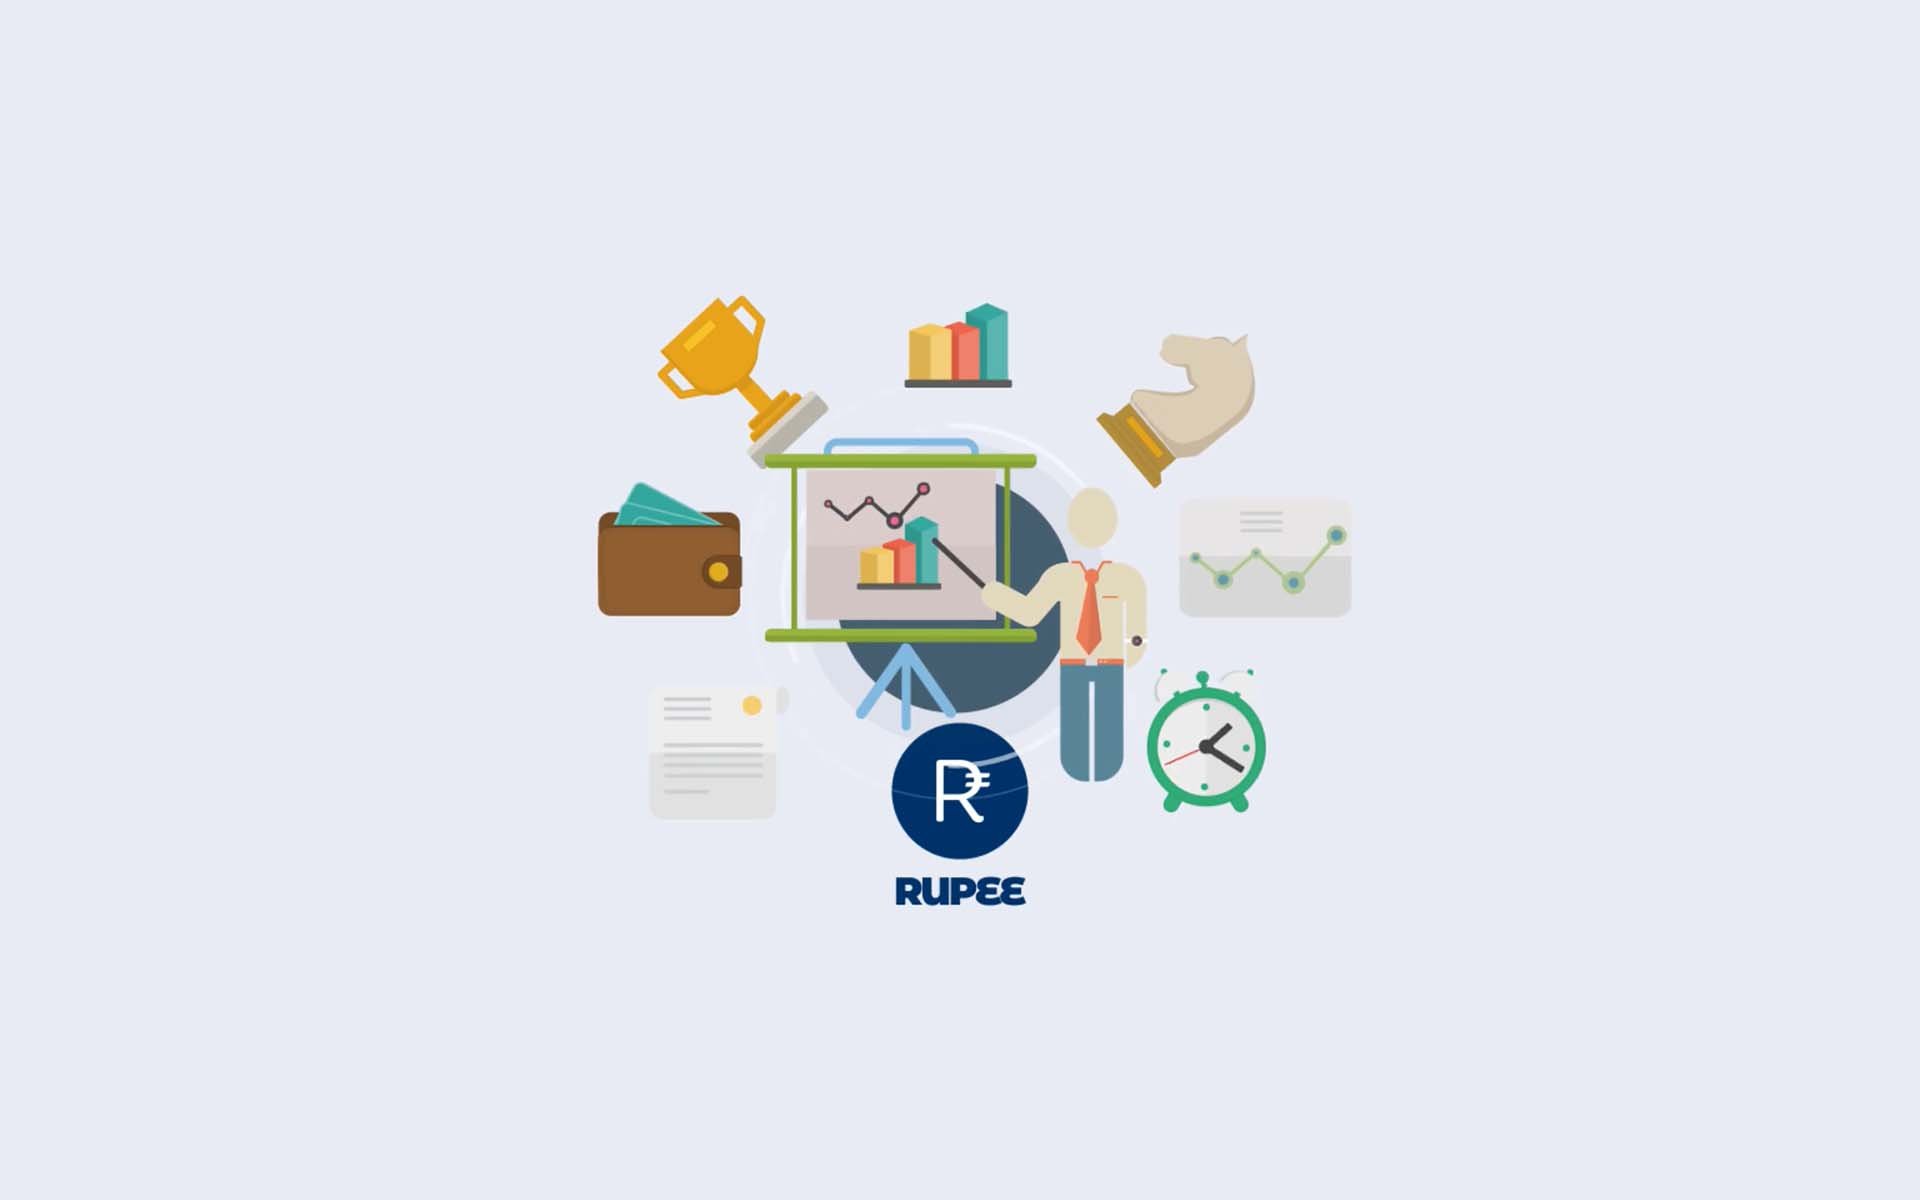 The Rupee Coin Utilizes Blockchain Technology and Will Become The Cryptocurrency of Choice In India And South Asia